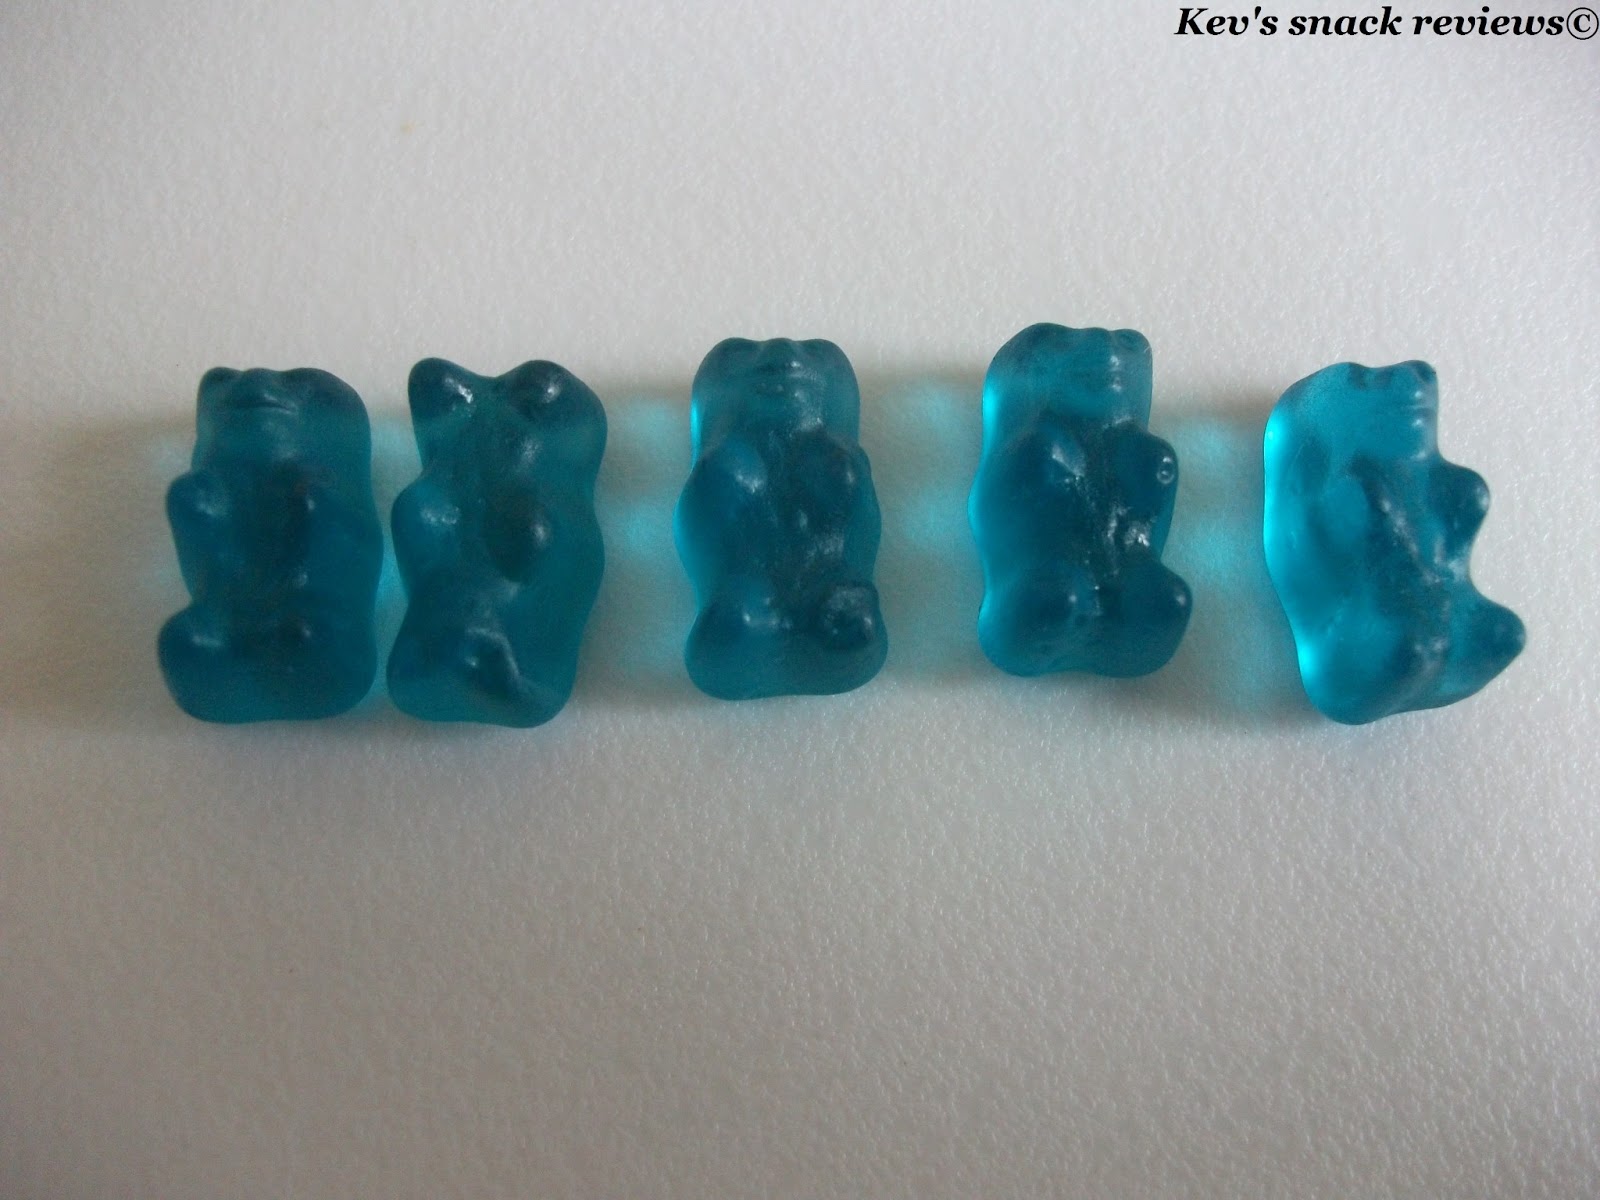 Blue Gummy Bear Candy The Bears Have Quite An